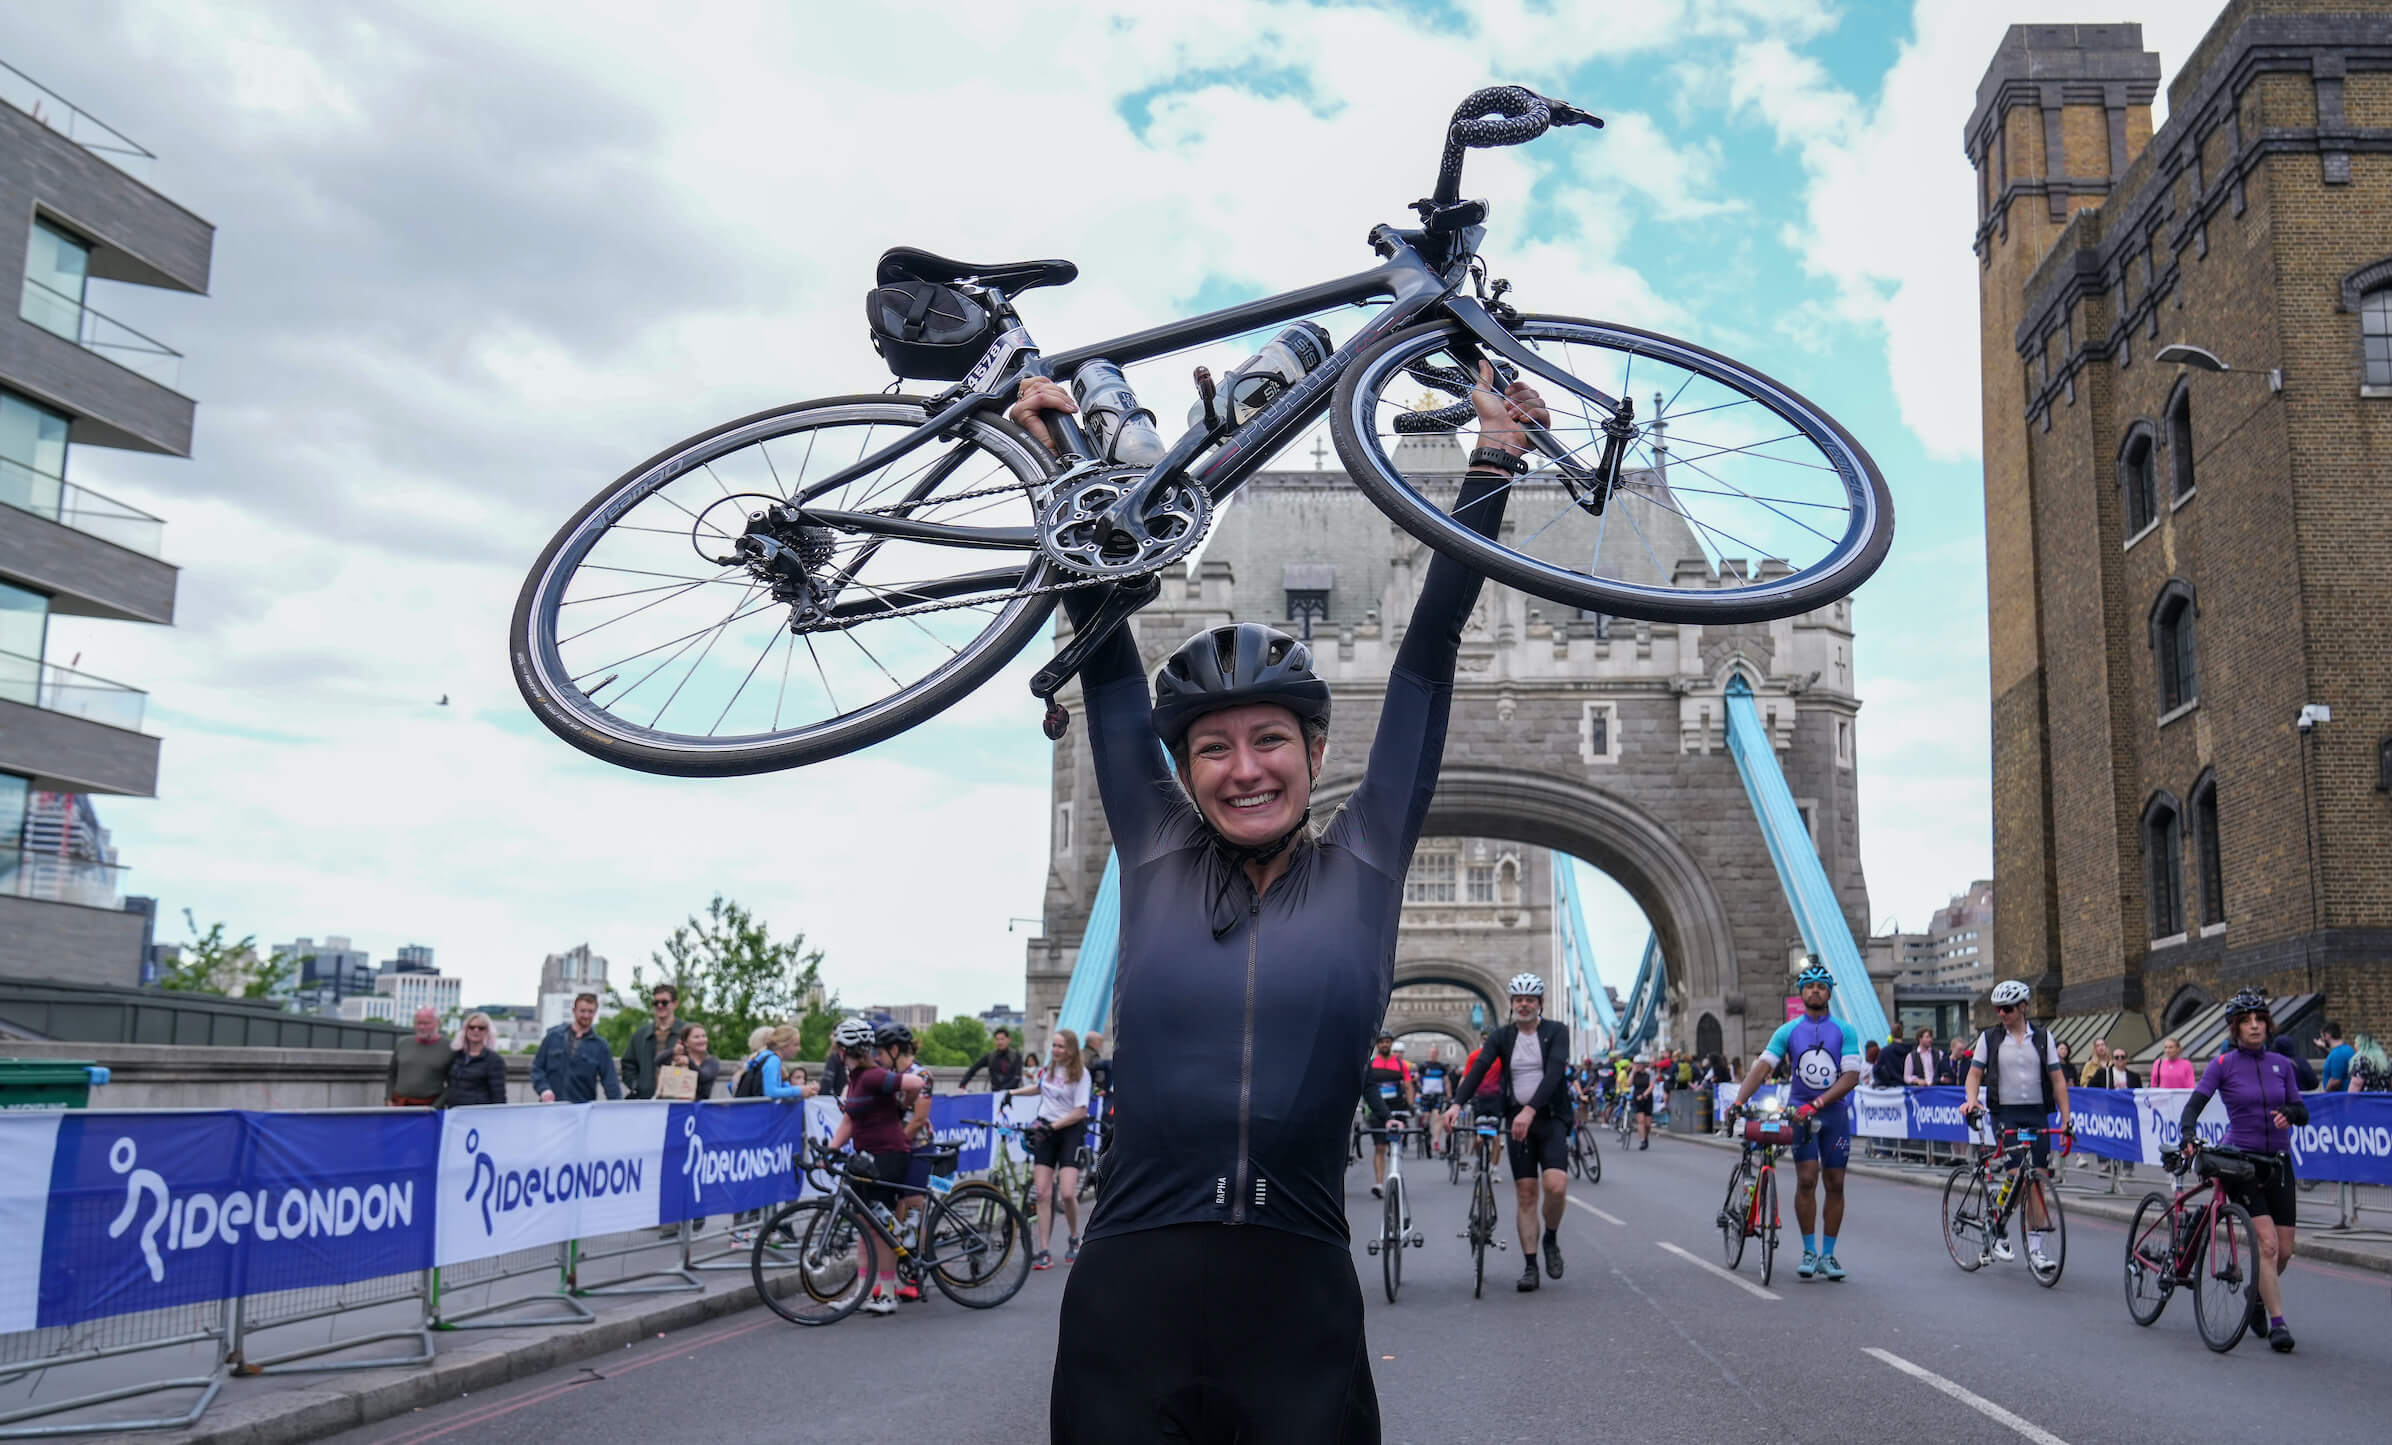 A happy cyclist lifts her bike above her head at Tower Bridge